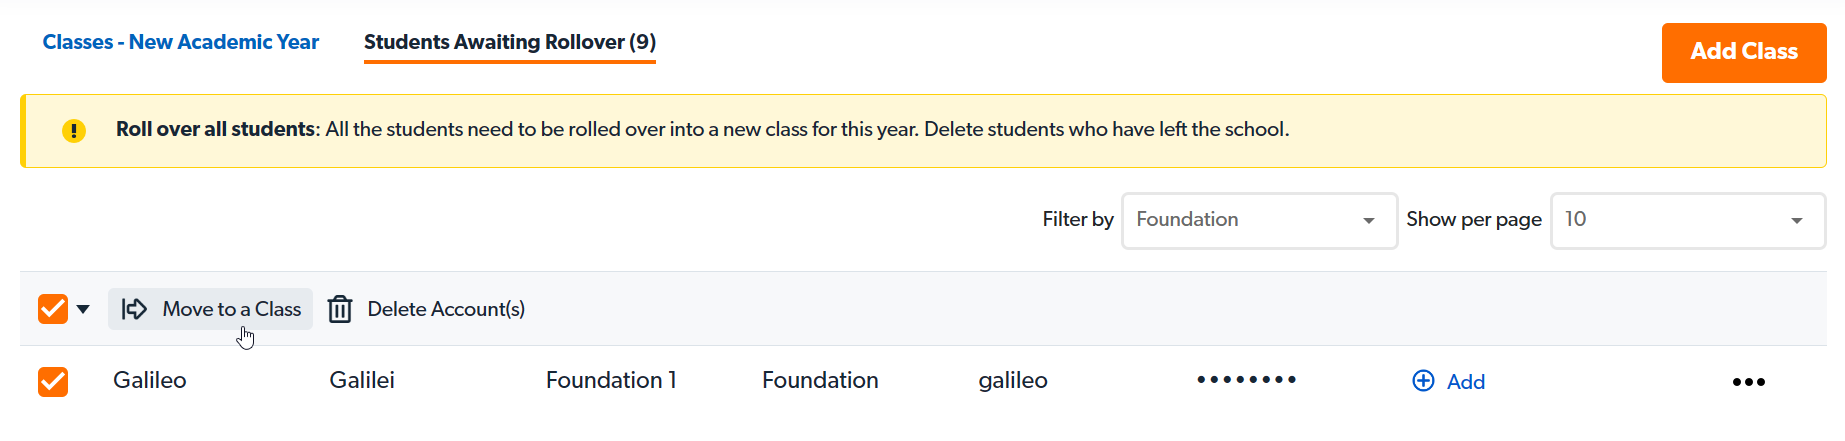 You can move students awaiting rollover to a class.